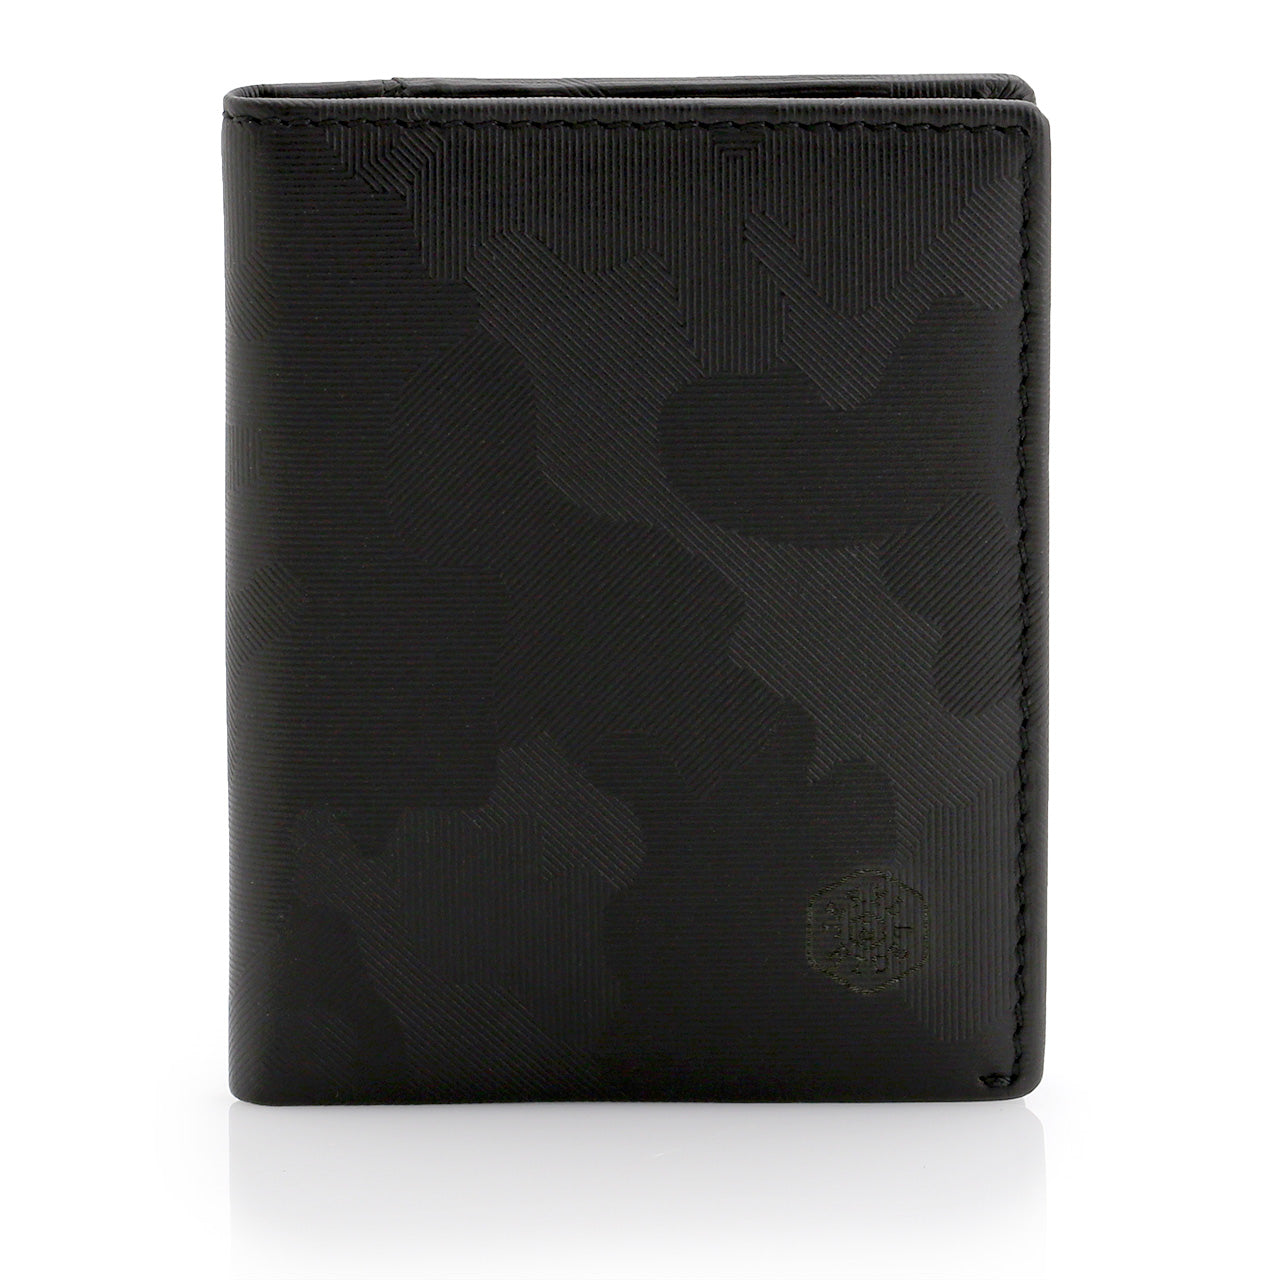 Jekyll and Hyde Slim Bifold Card Holder Front- Havana Camo colour